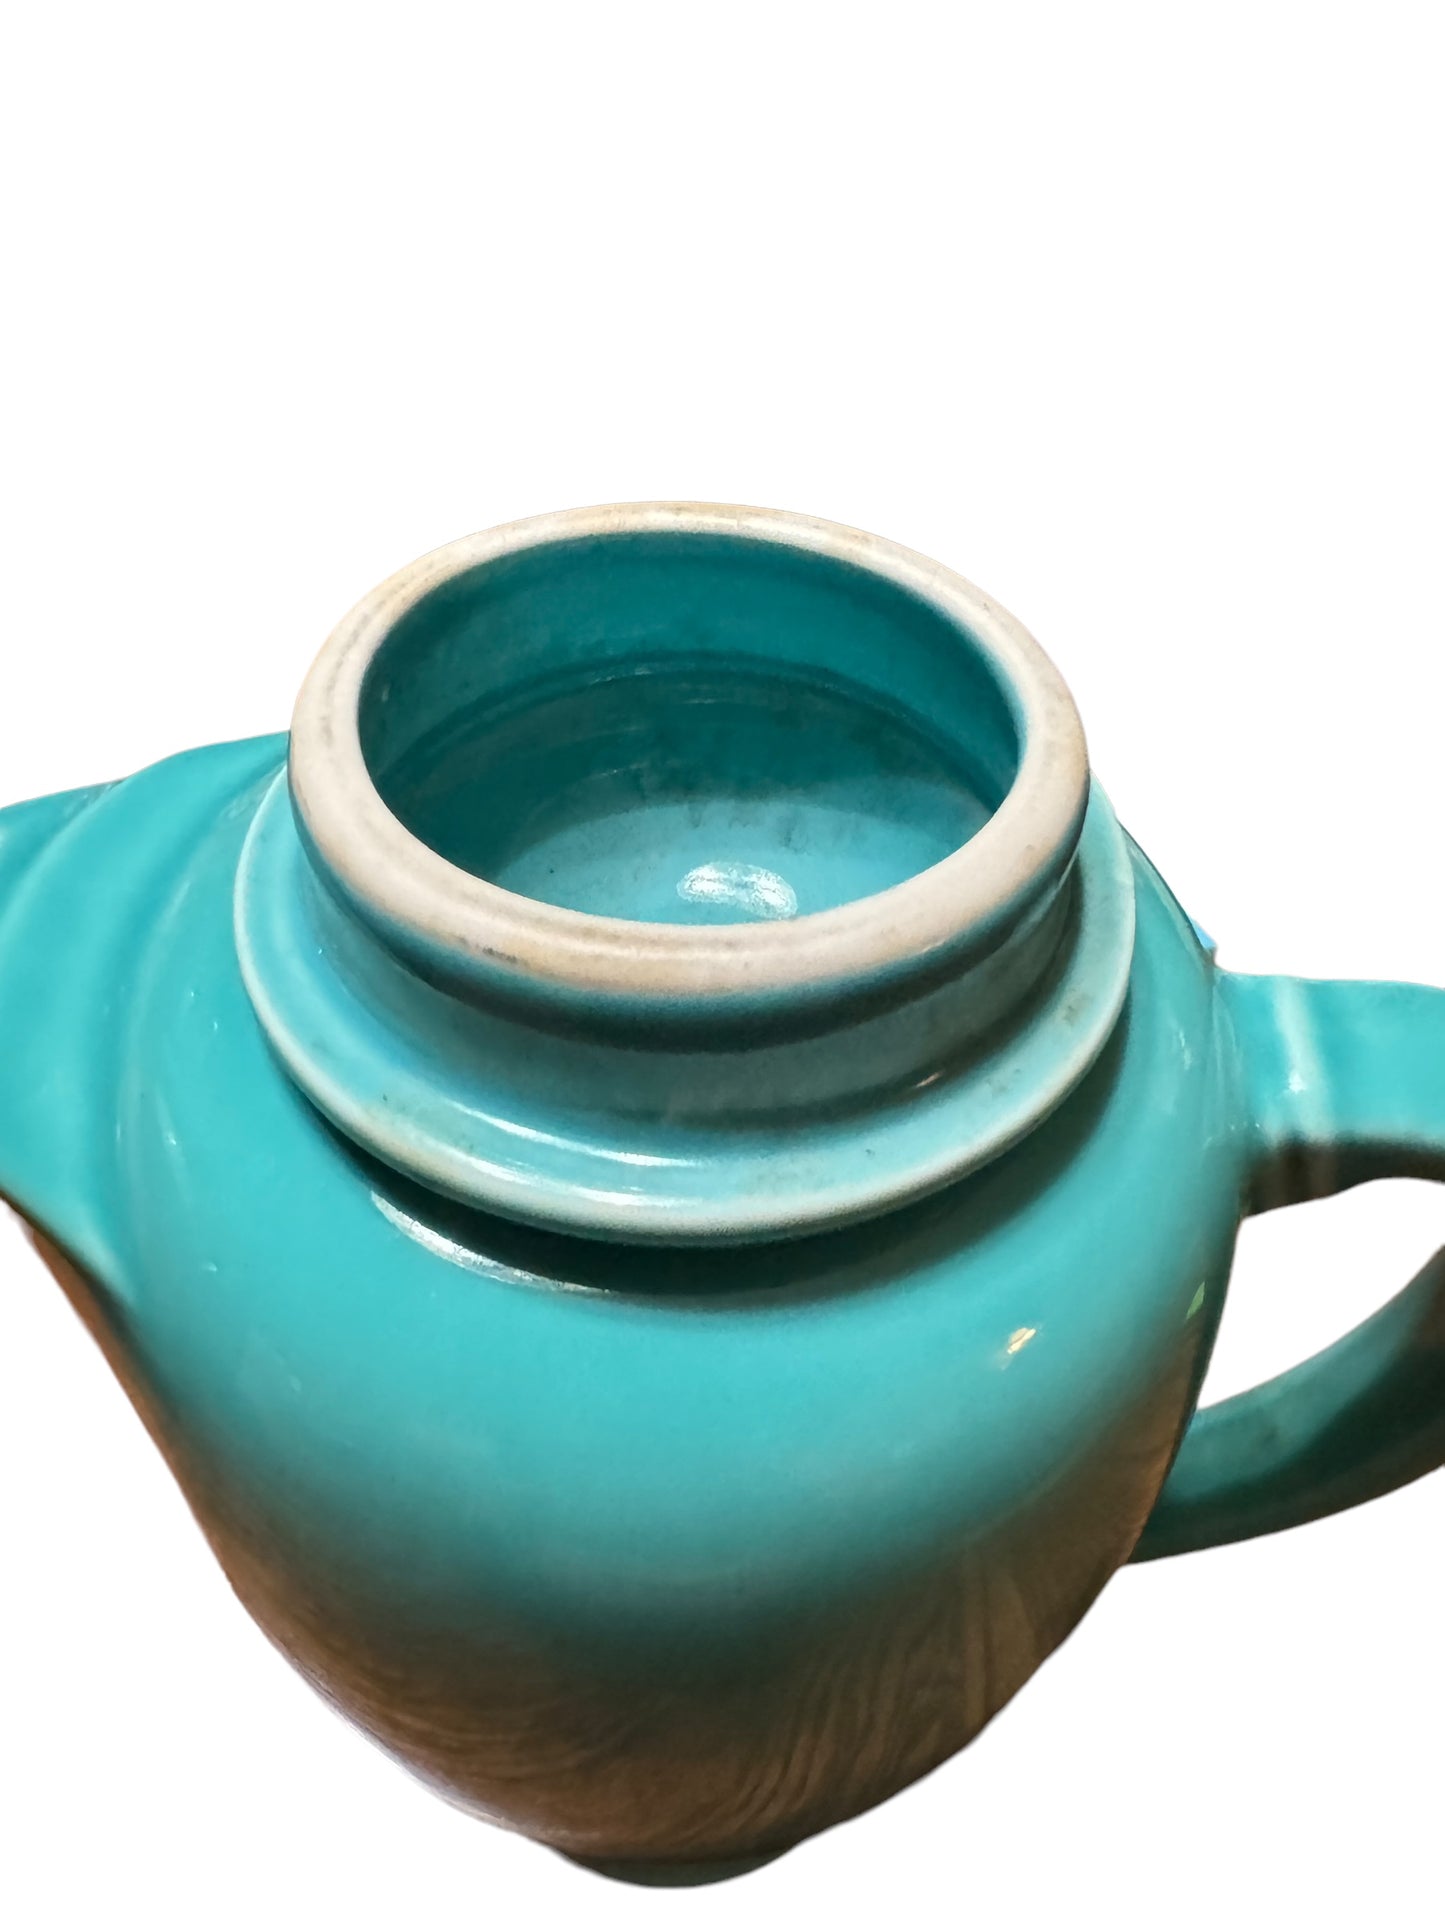 Fiesta P86 Coffee Pot / Server in Turquoise New With Tags